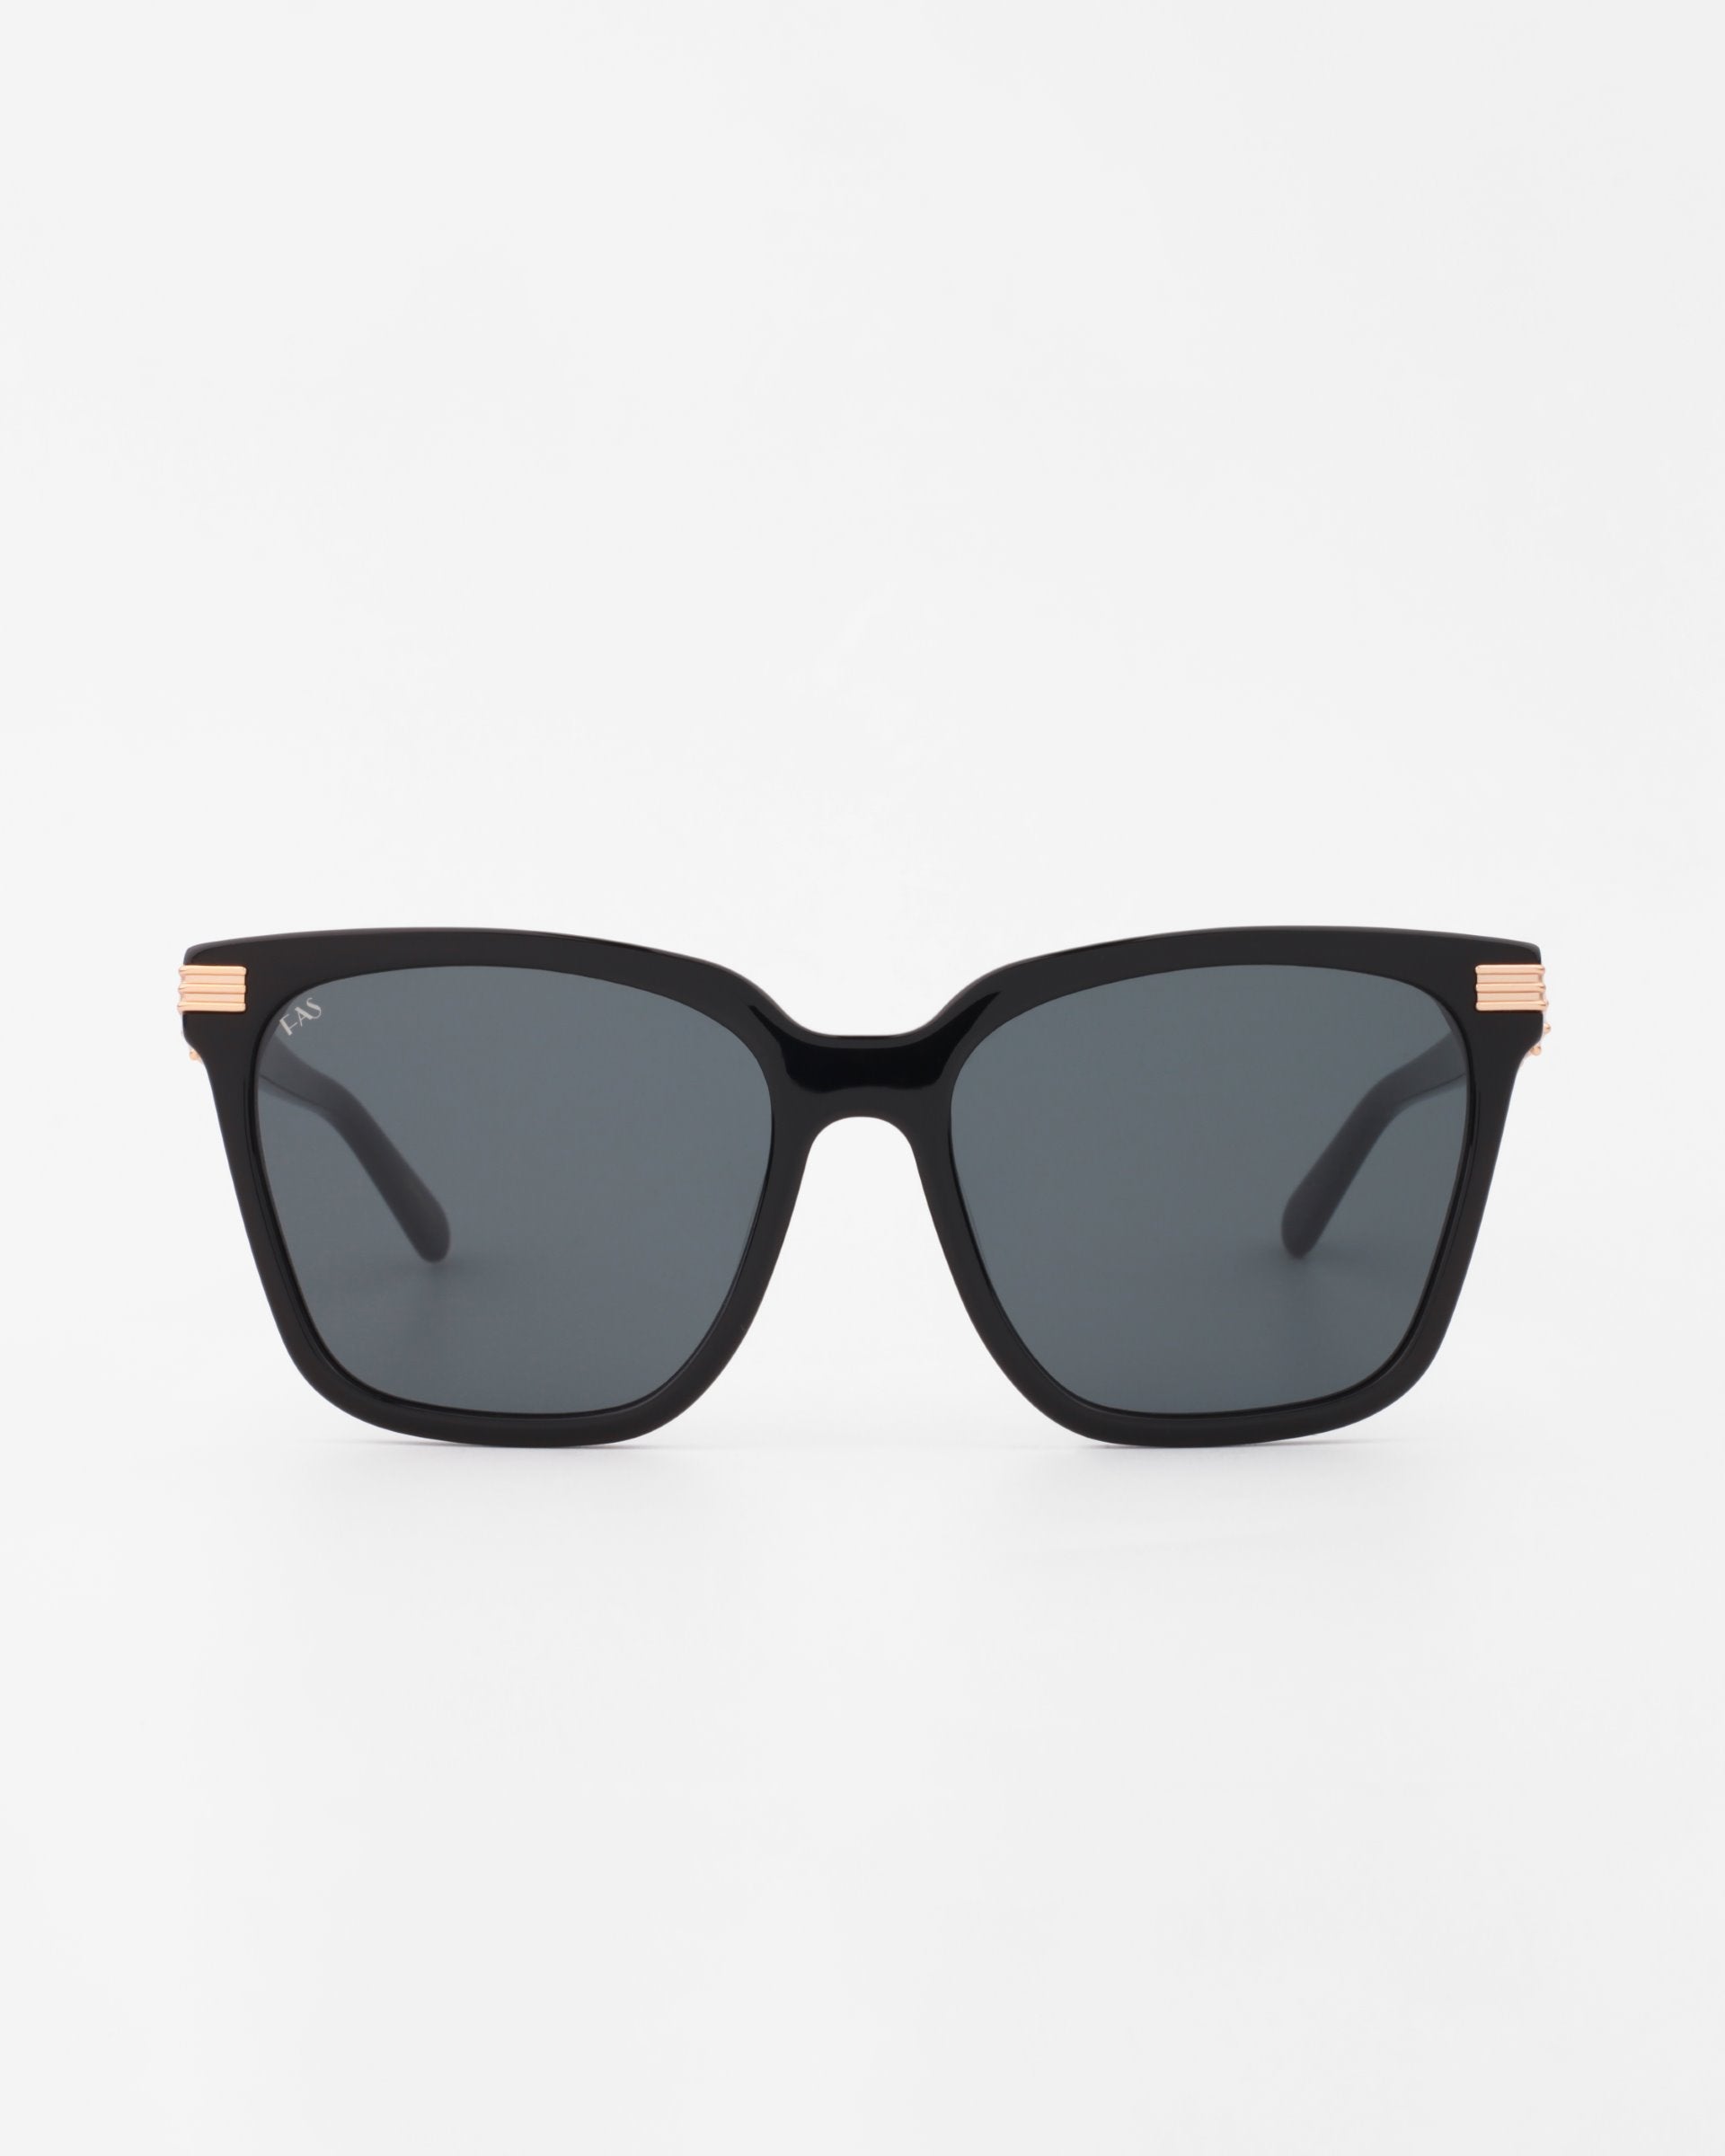 A pair of black square-framed Gaia sunglasses with dark, UV-protected lenses. The slightly thick, minimalist handmade acetate frames feature 18-karat gold-plated accents near the hinges. The background is plain white. For Art&#39;s Sake®.